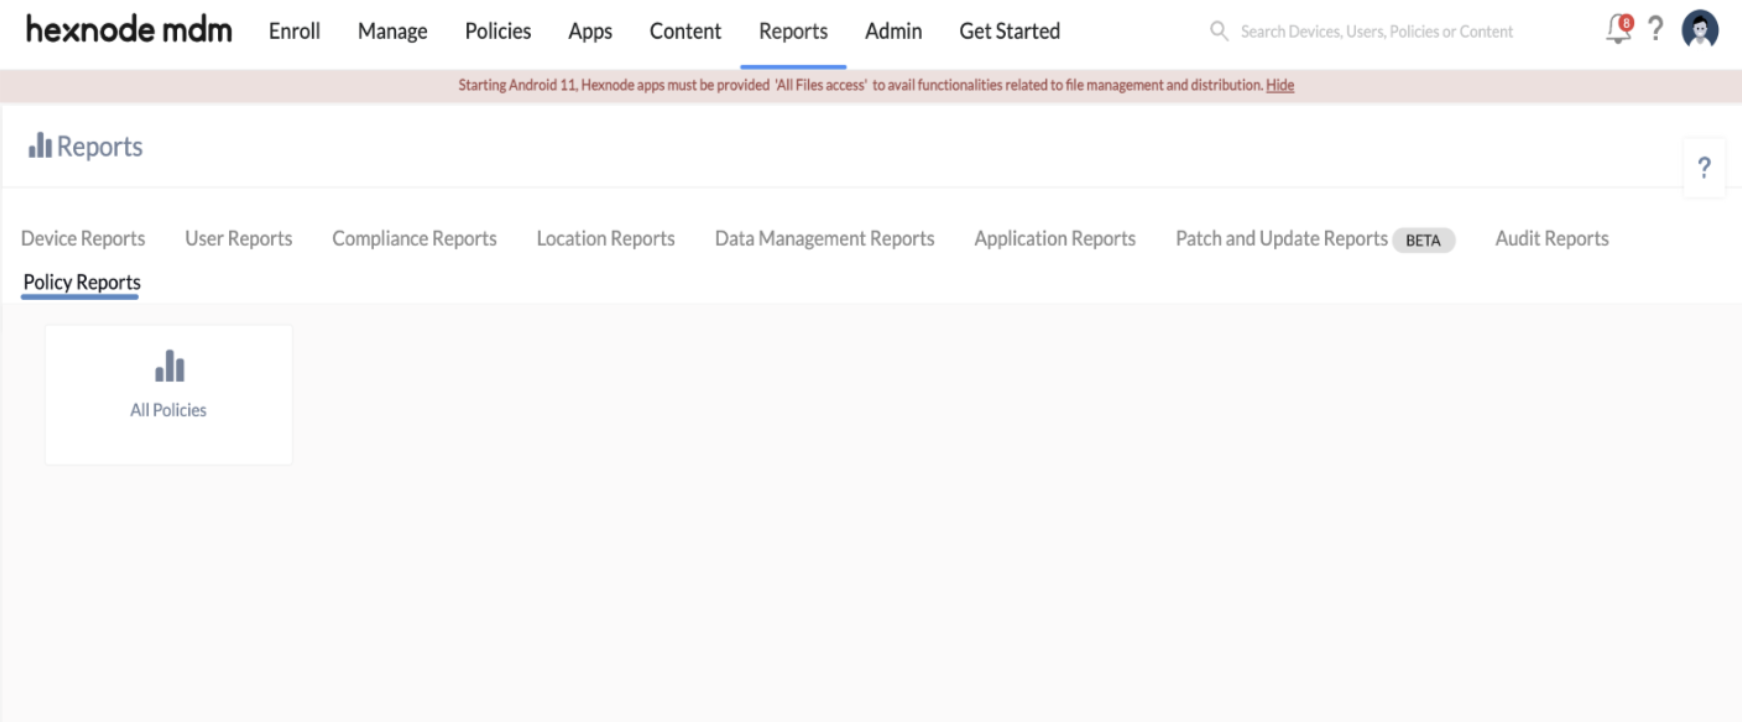 Policy Reports in Hexnode UEM